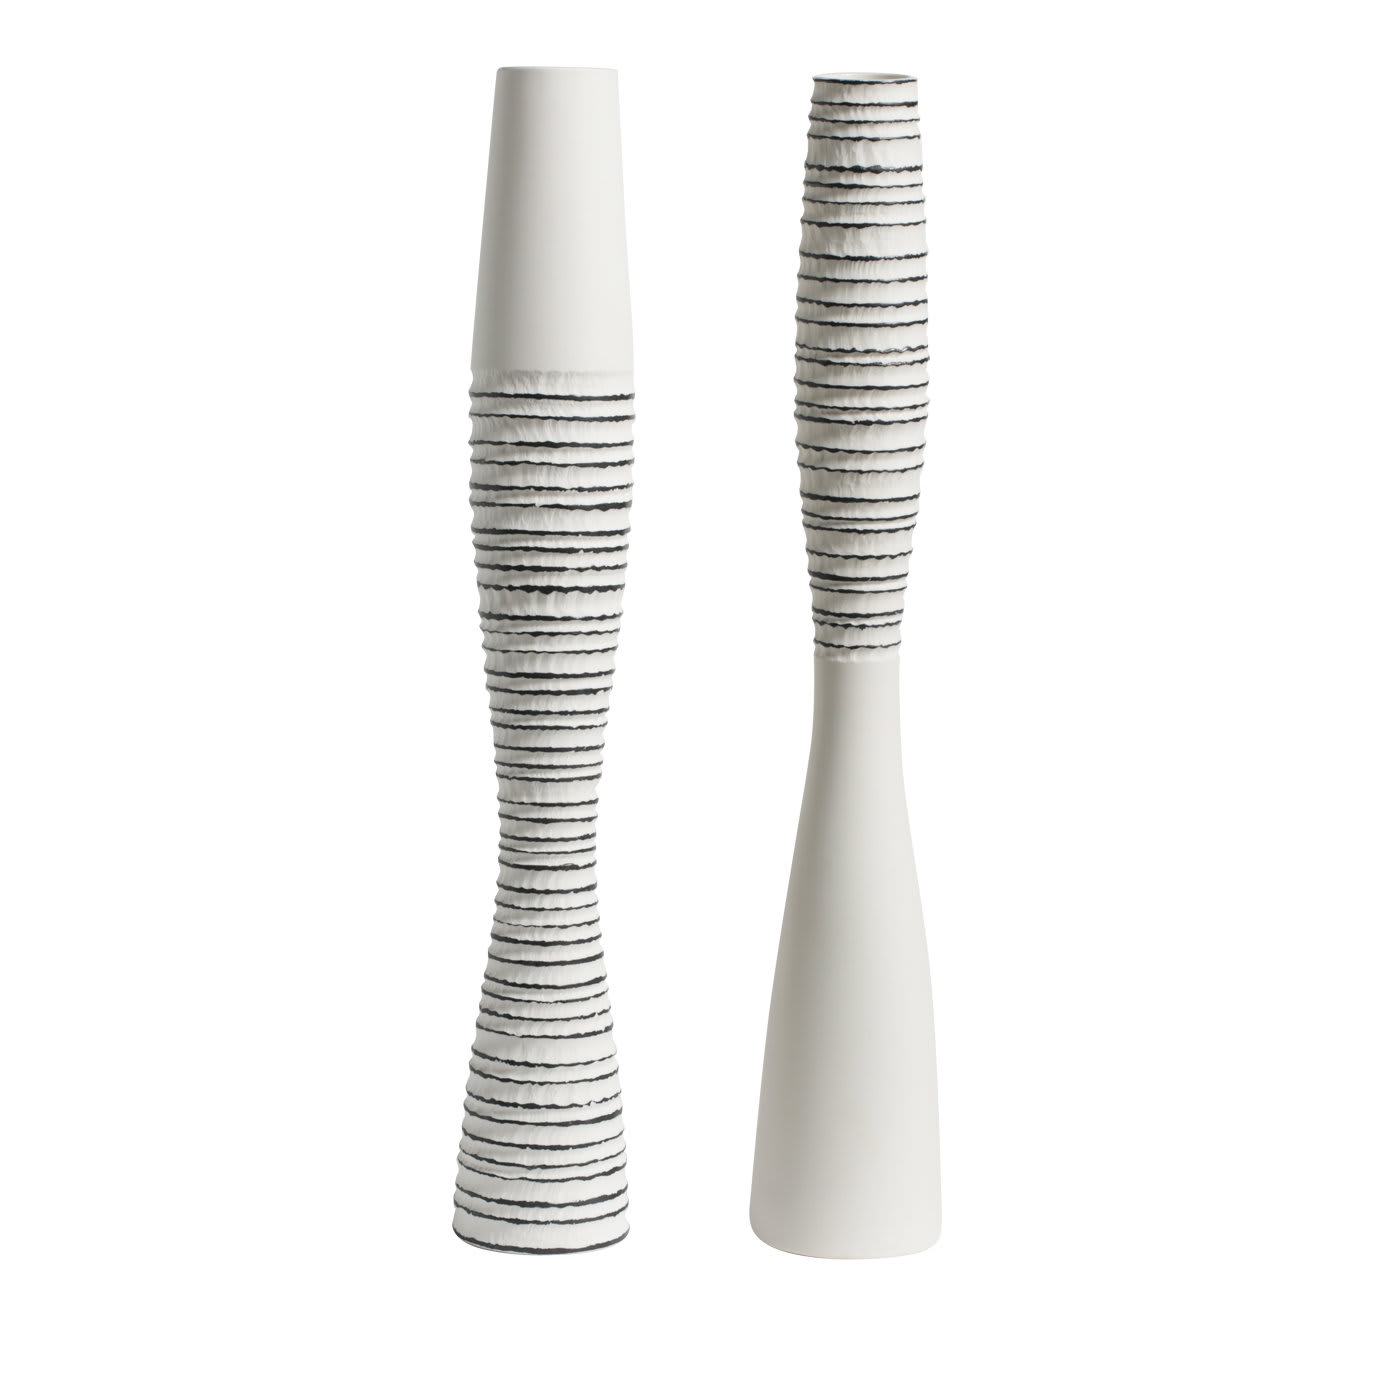 Set of 2 Antithesis Carved Vases - Fos Ceramiche